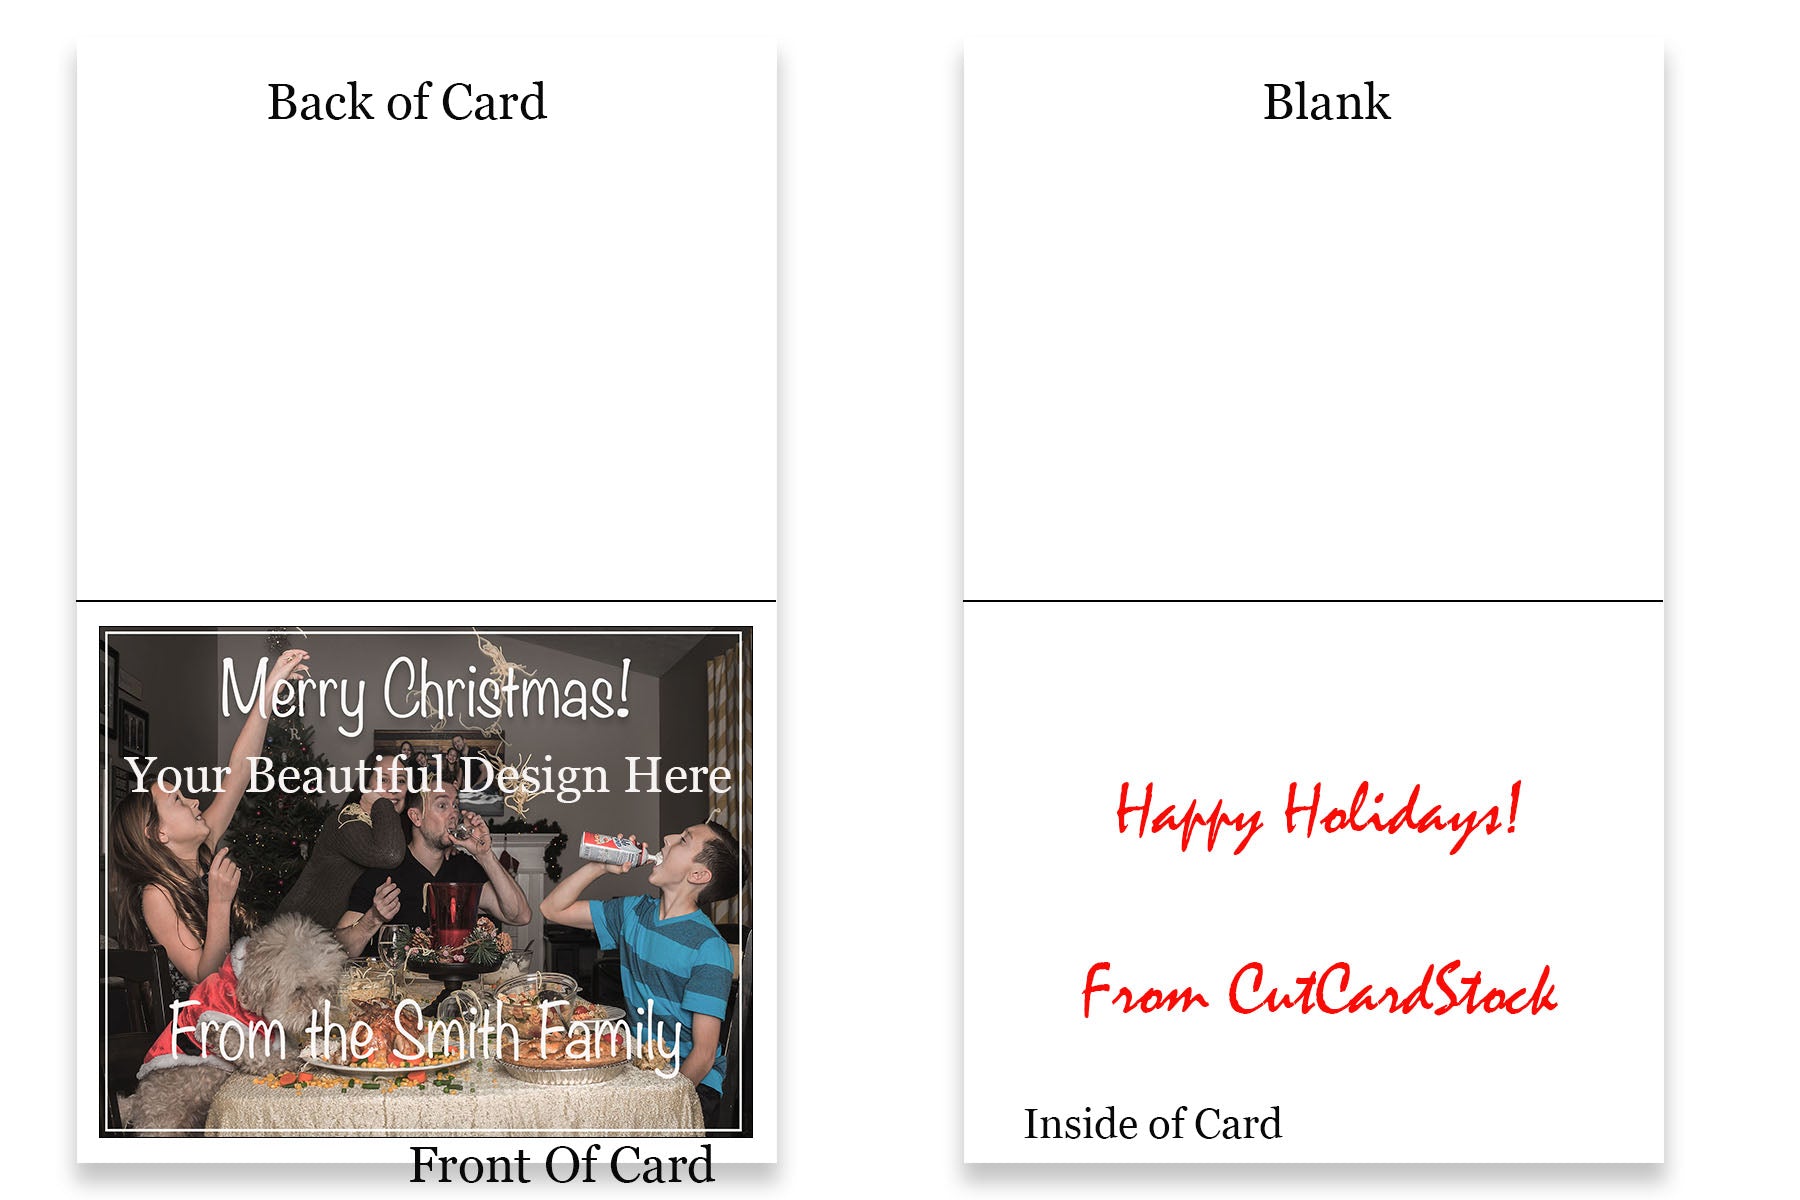 Print Your Own Design 5x7 Folded Card